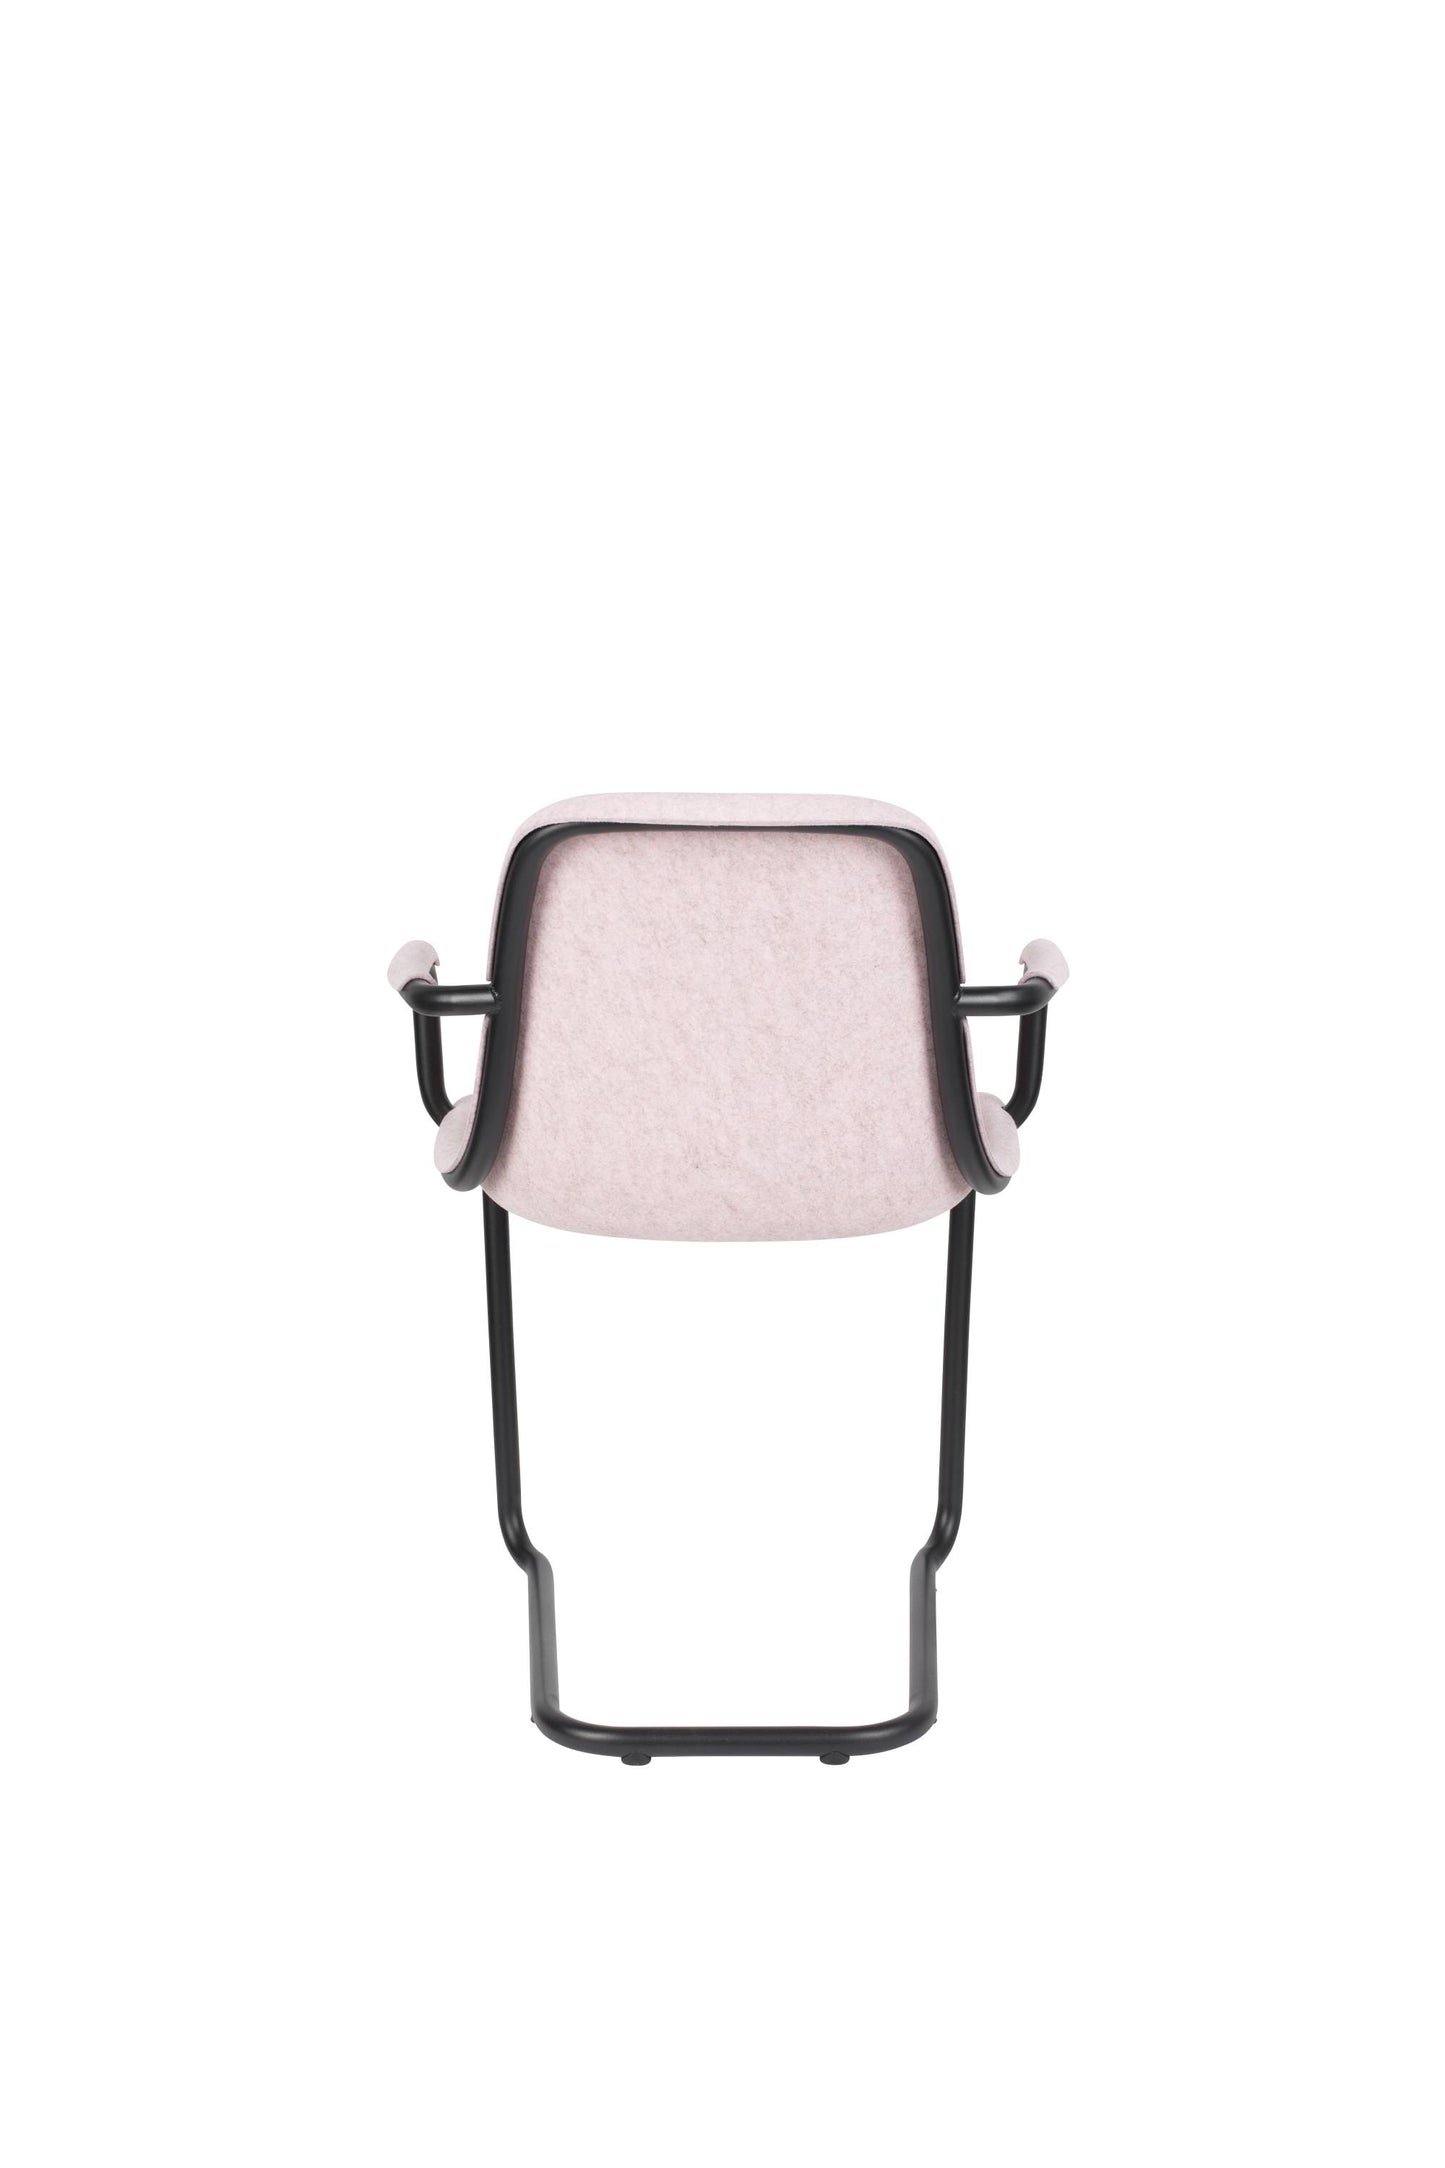 Zuiver | ARMCHAIR THIRSTY SOFT PINK Default Title